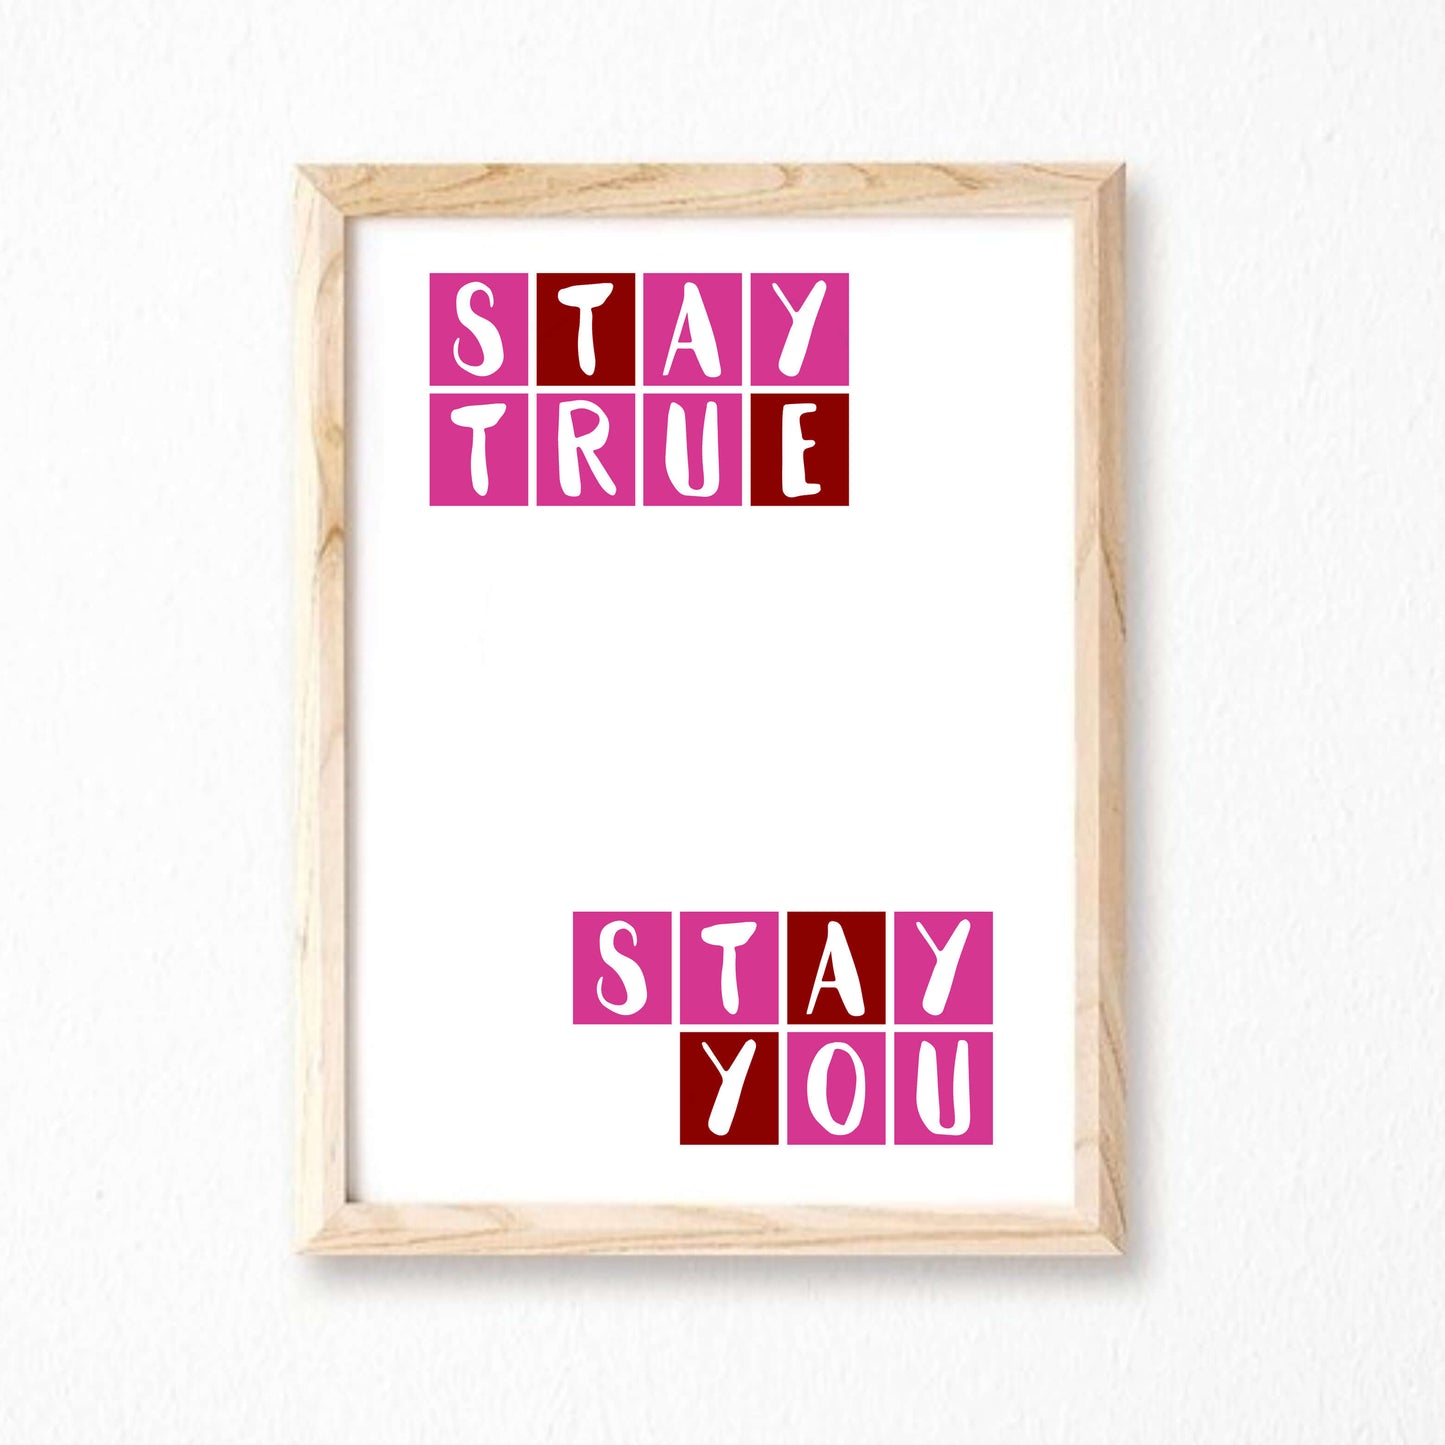 Stay True Stay You Wall Print in pink and red by SixElevenCreations. Product Code SEP0086